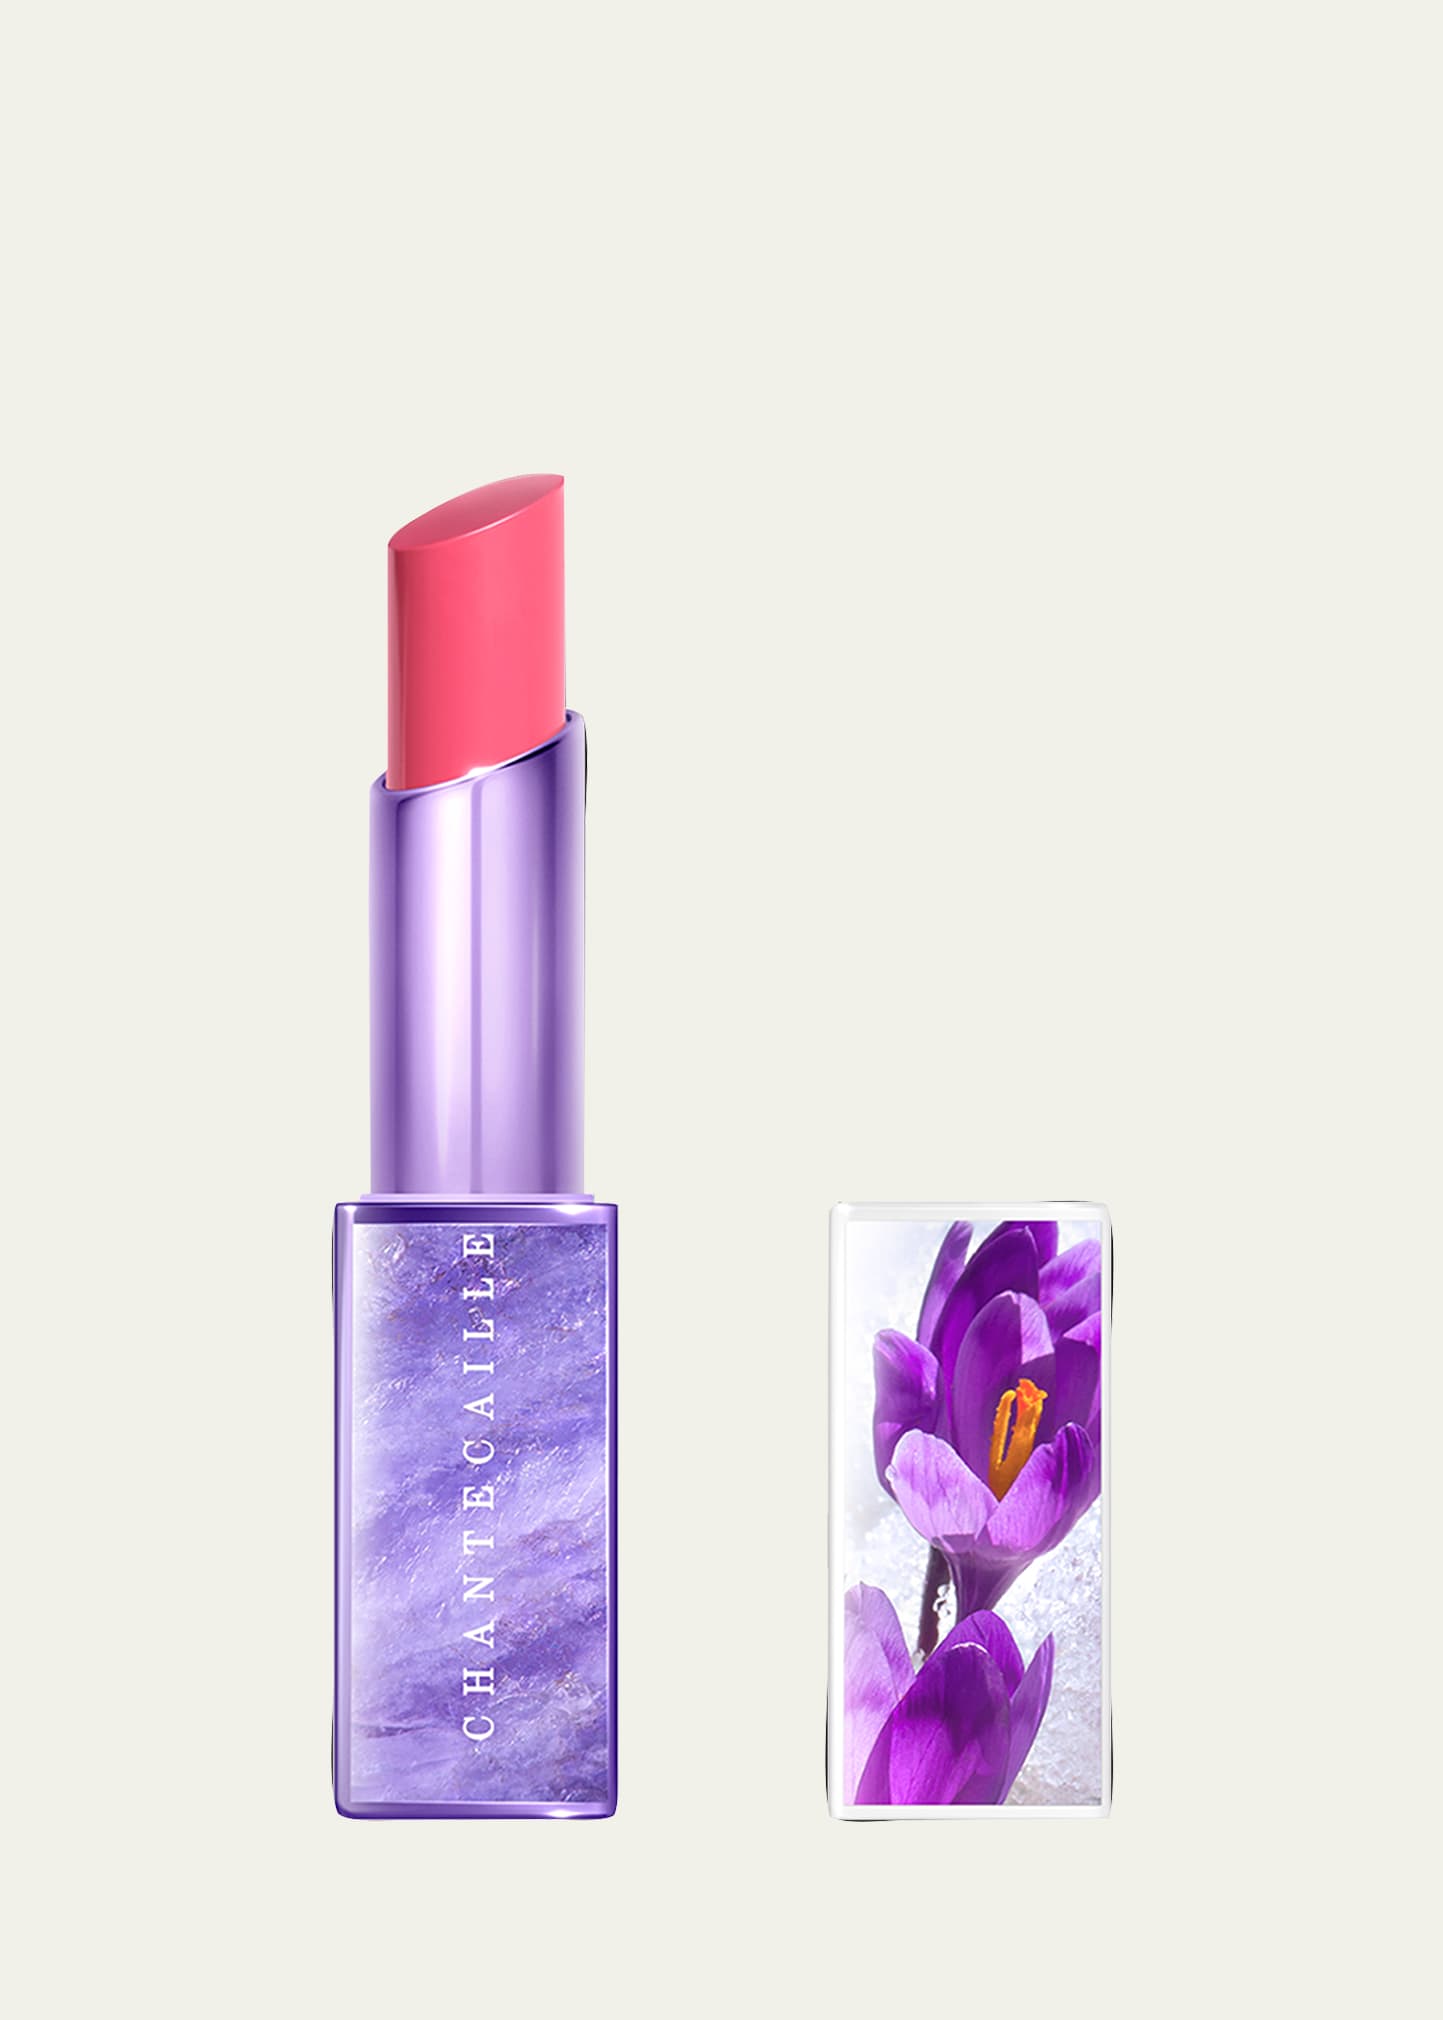 Chantecaille Limited Edition Wild Meadows Lip Chic In Crocus